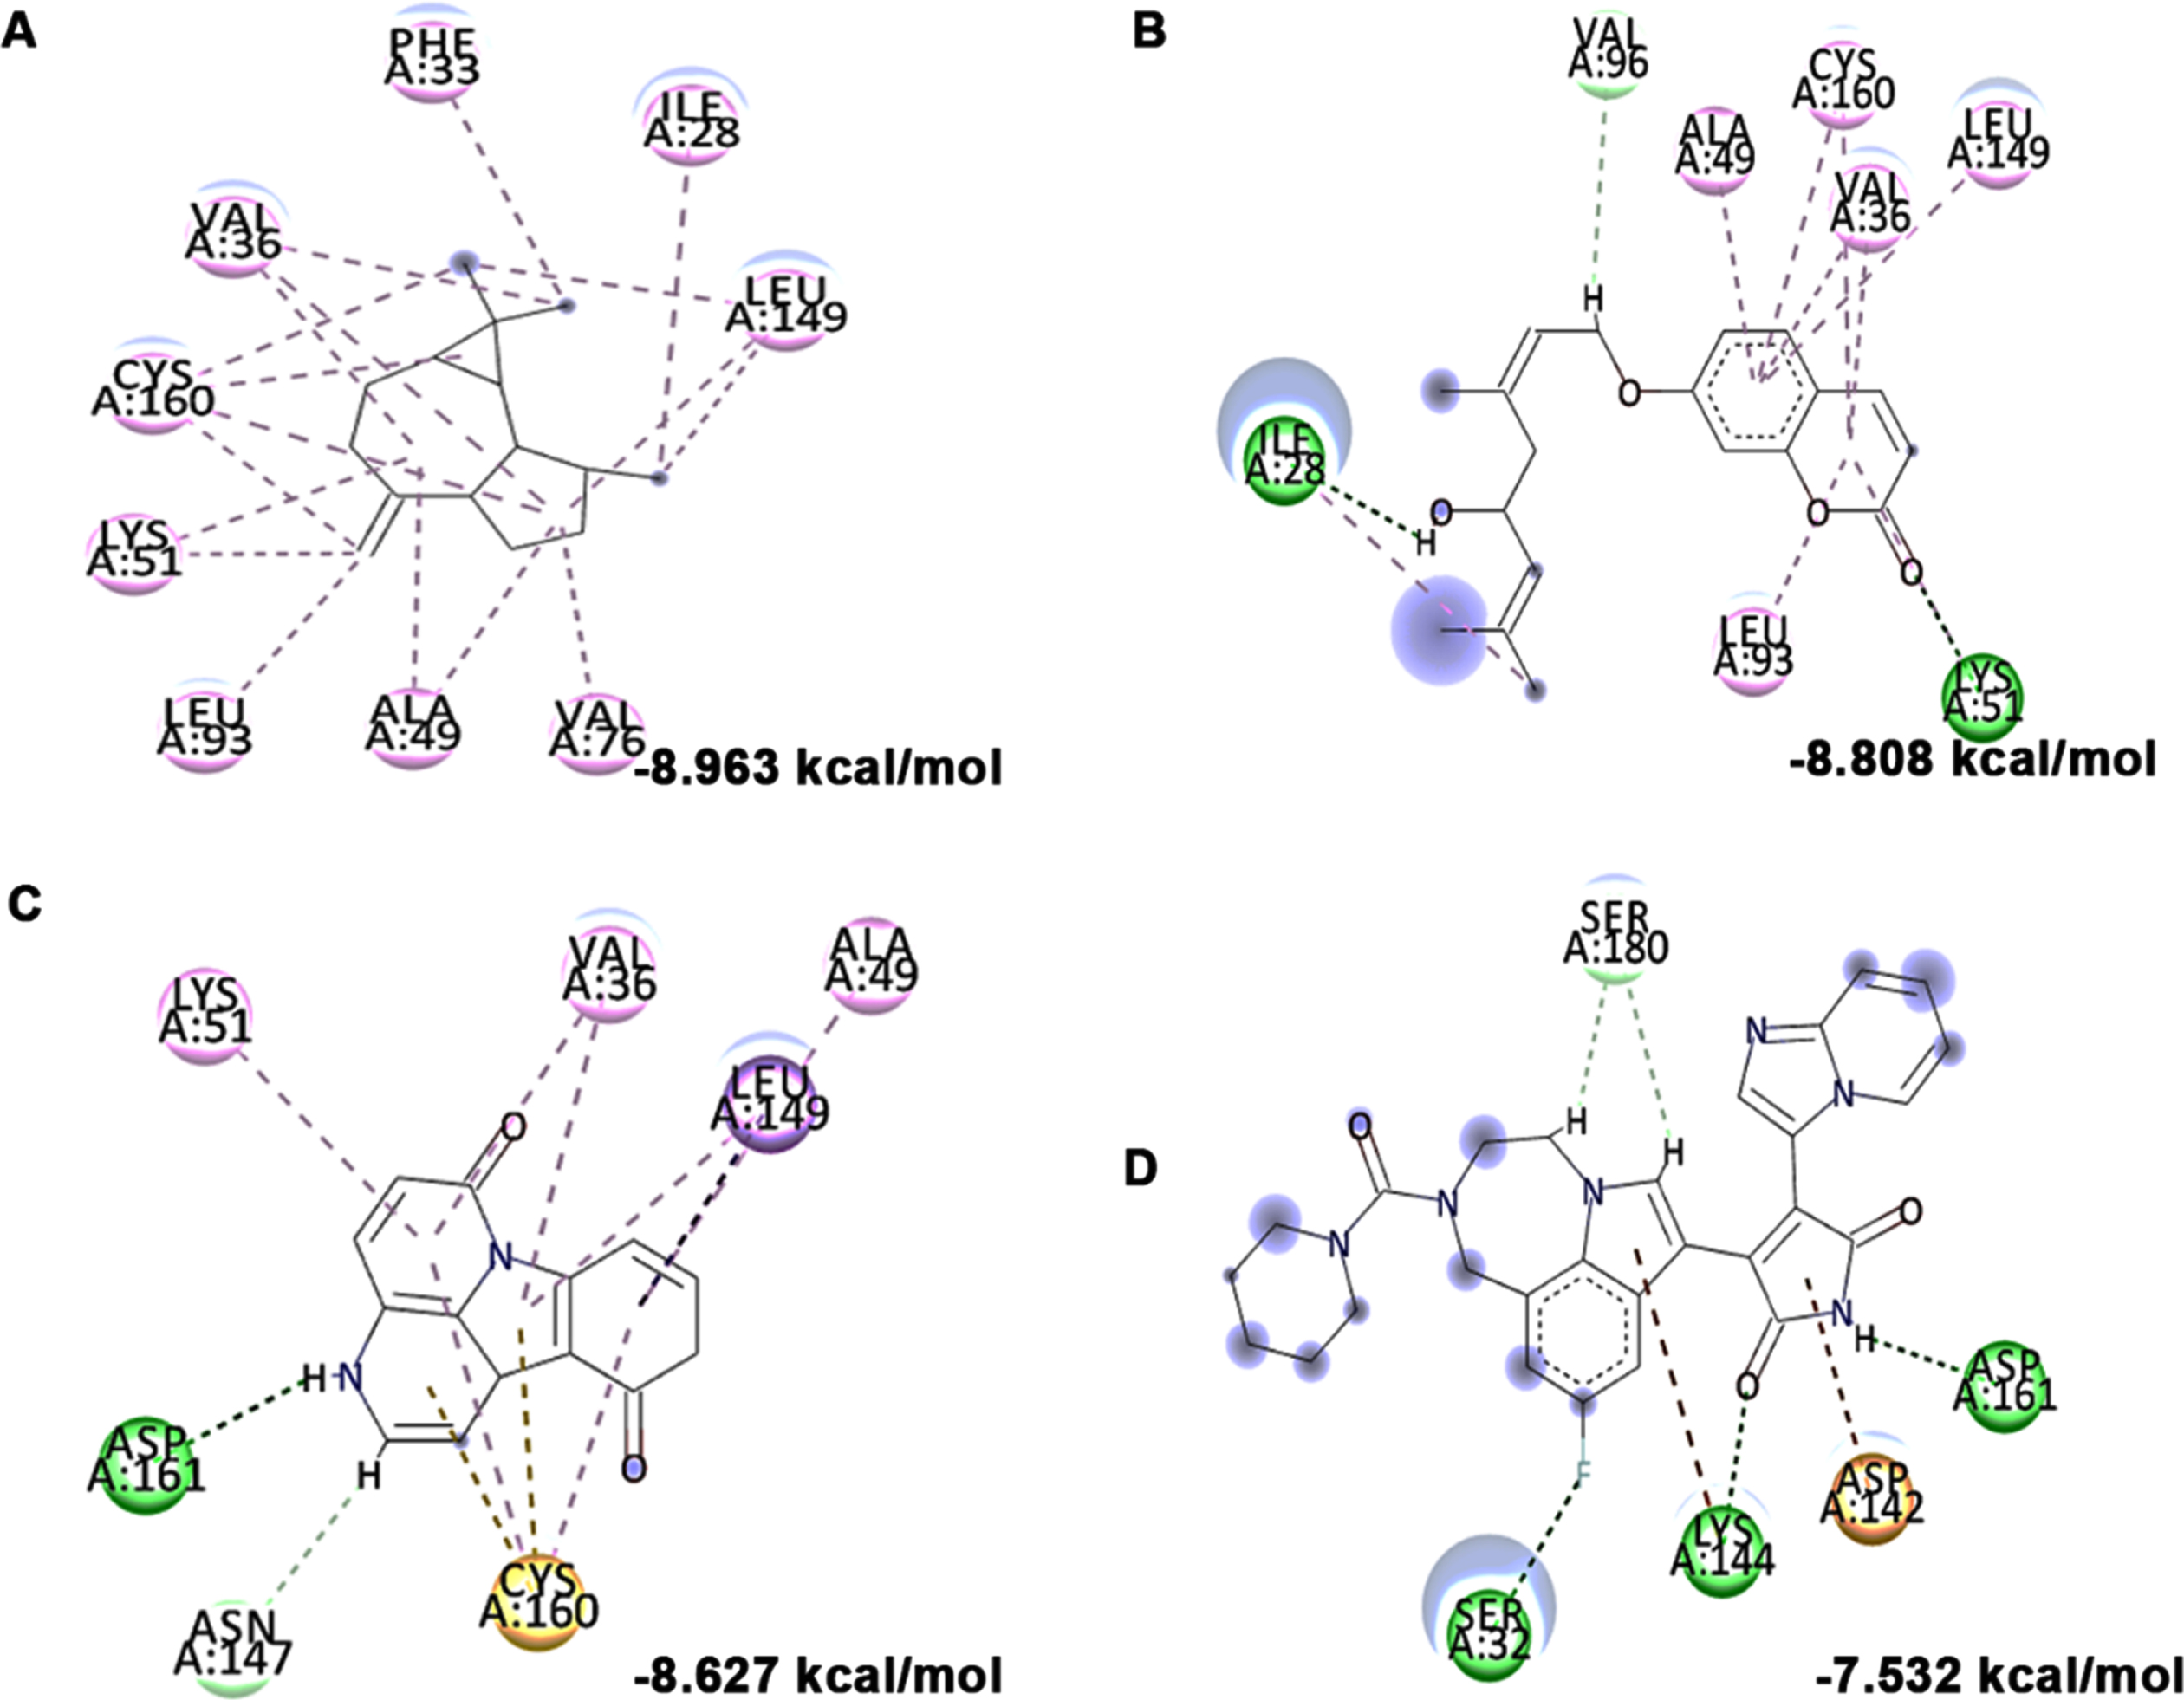 Molecular docking and mode of interaction of compounds (top 3 hits) from HS extract against GSK-3β (A) allo-Aromadendrene (B) Anisocoumarin H (C) 11-Hydroxycanthin-6-one (D) LY2090314 (Green indicates hydrogen bond, purple represents alkyl bond, pink represent a π-alkyl bond, yellow represent π-sulfur interactions)